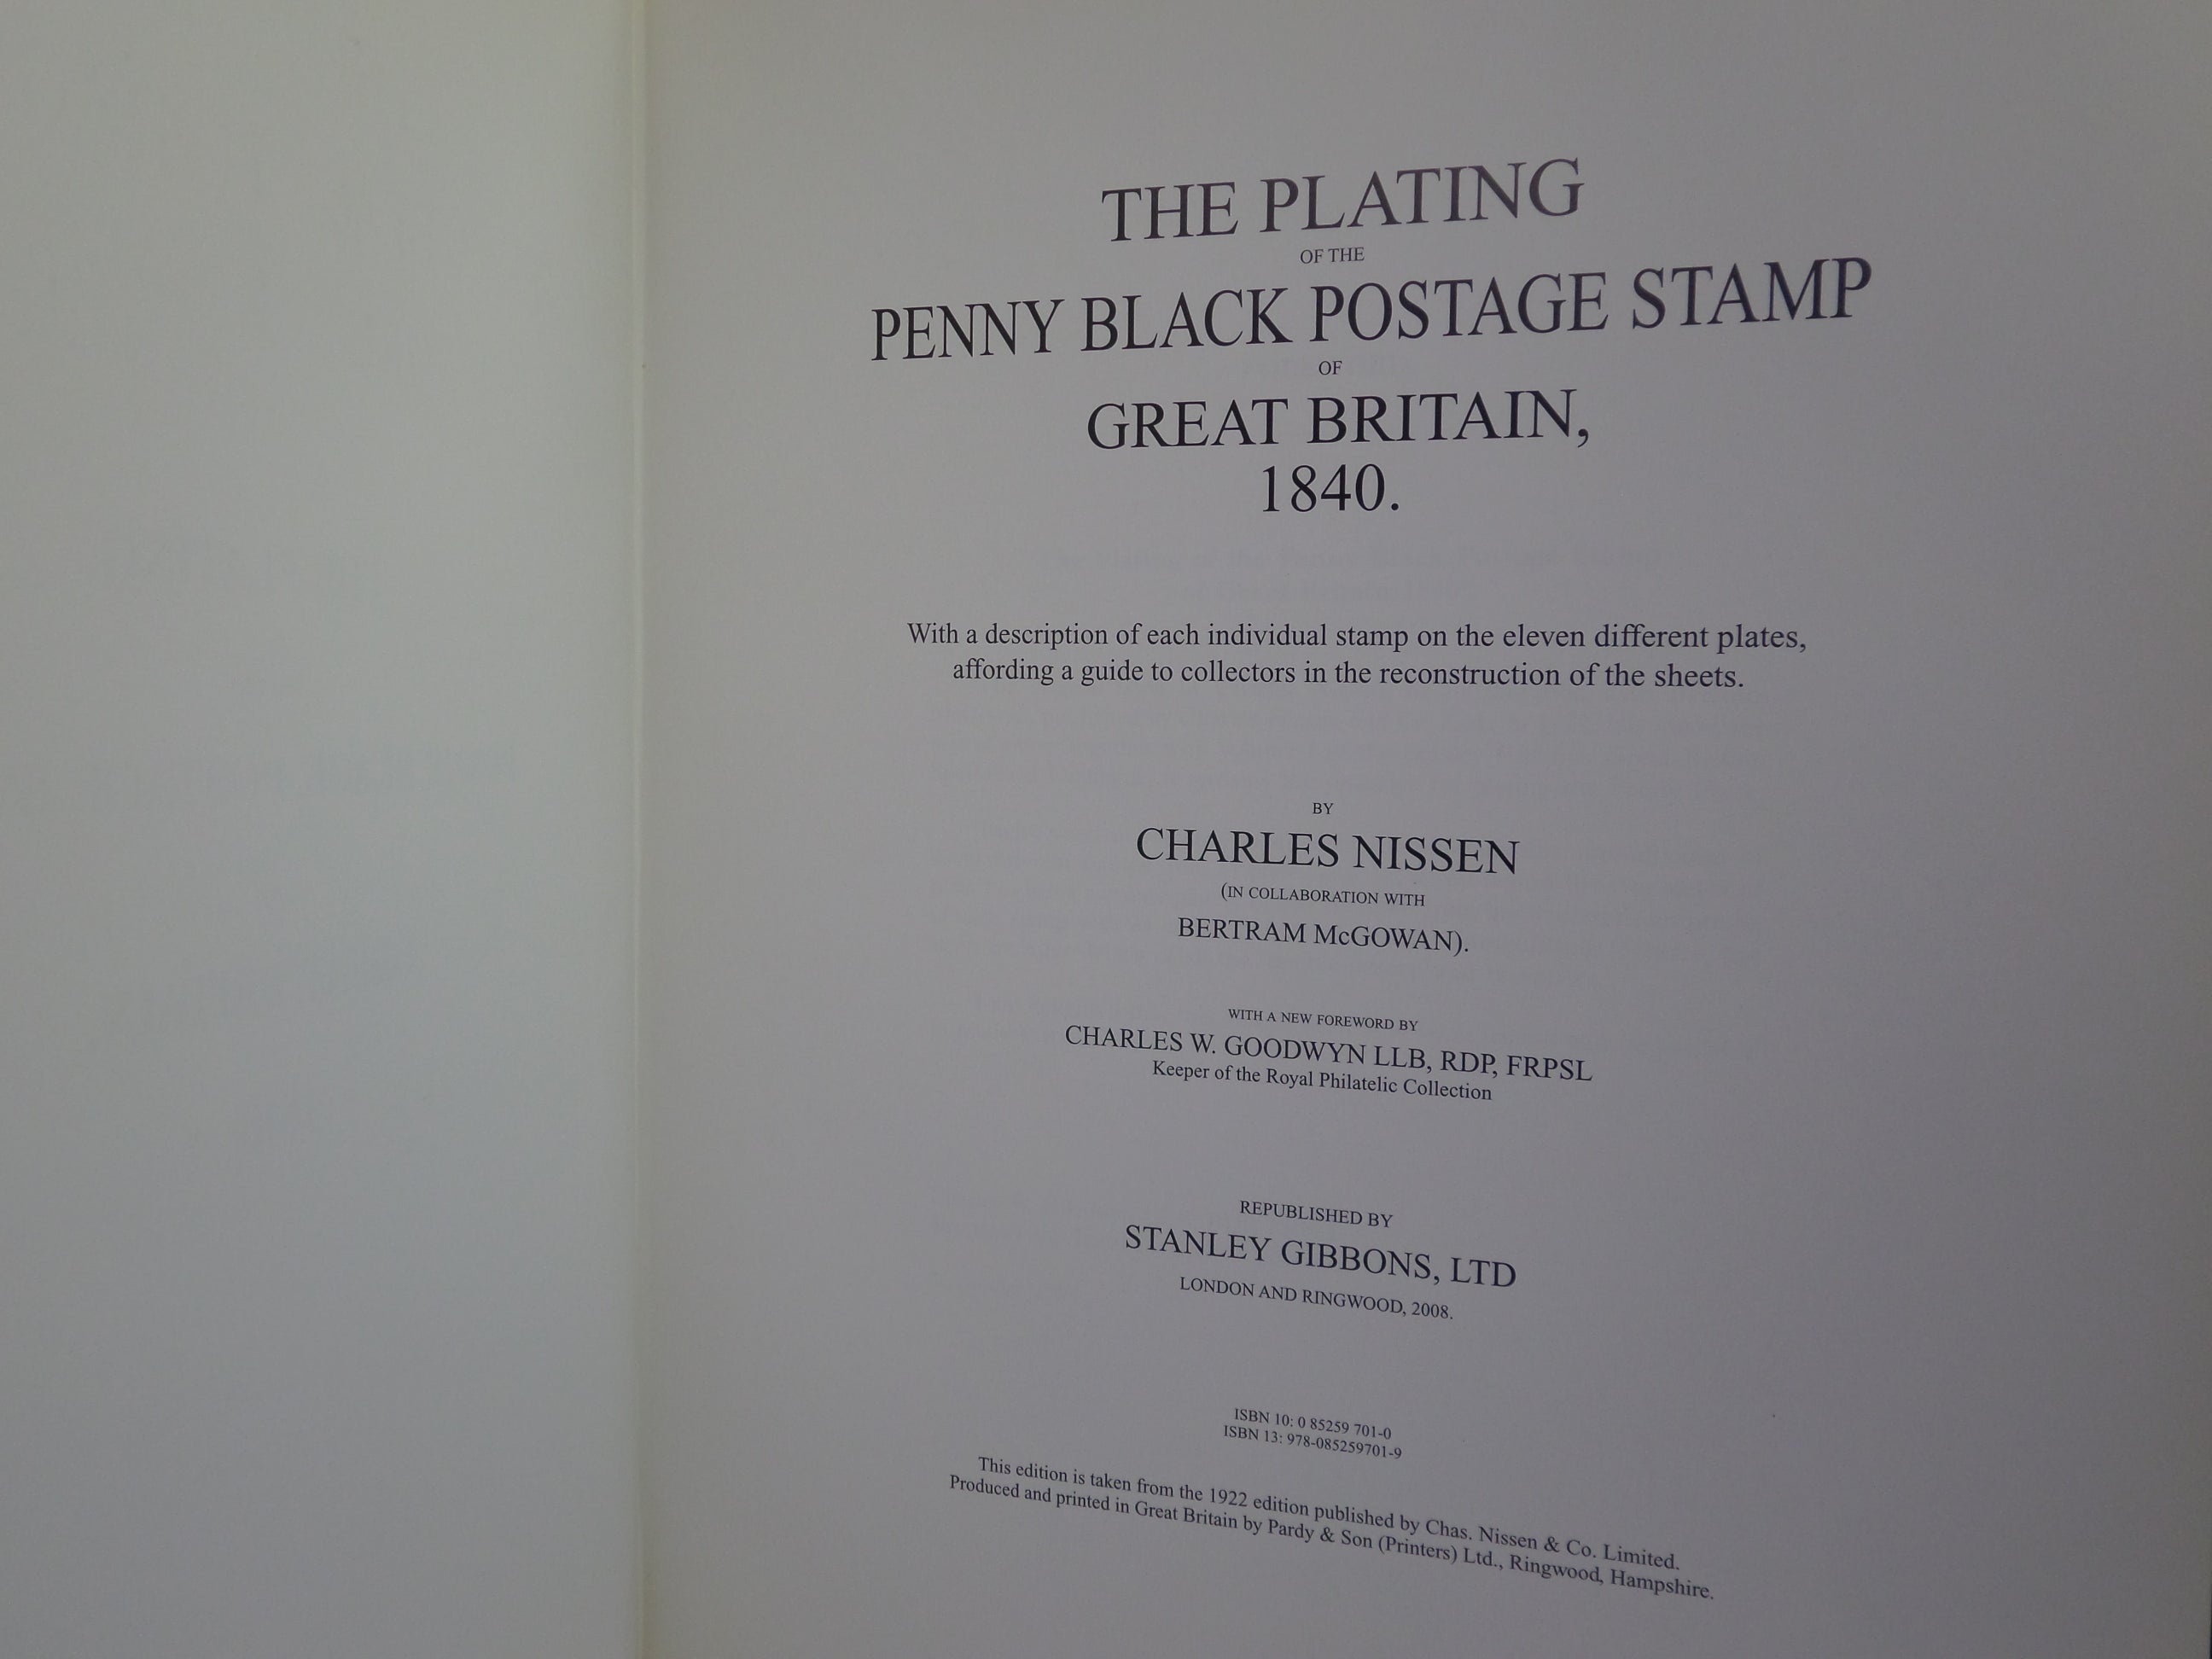 THE PLATING OF THE PENNY BLACK POSTAGE STAMP OF GREAT BRITAIN BY CHARLES NISSEN 1998